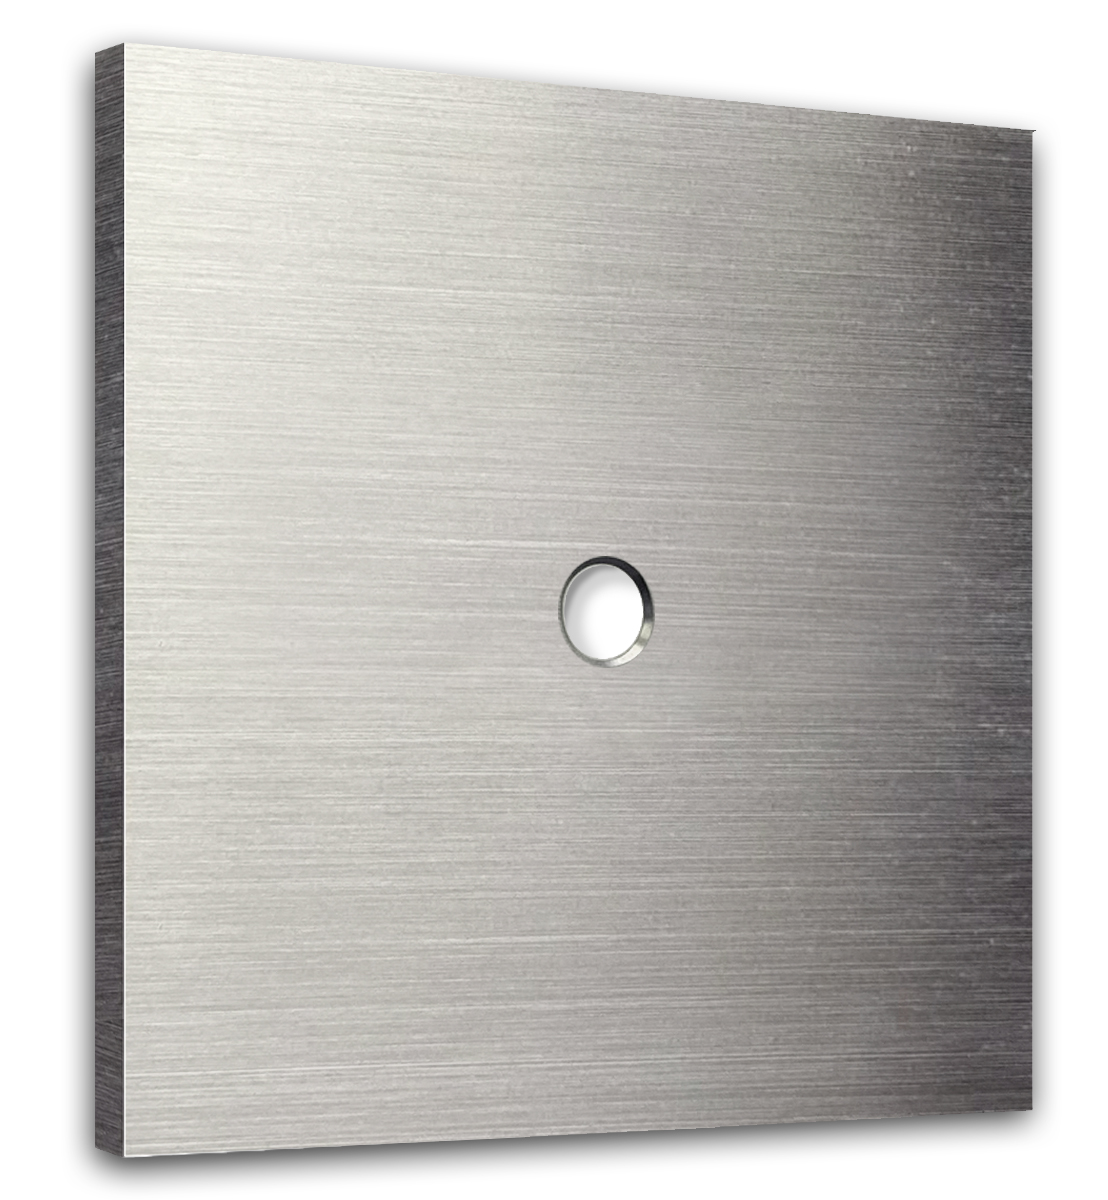 Retro toggle switch plate NINA 1-Gang.  Stainless steel metal. CJC Systems